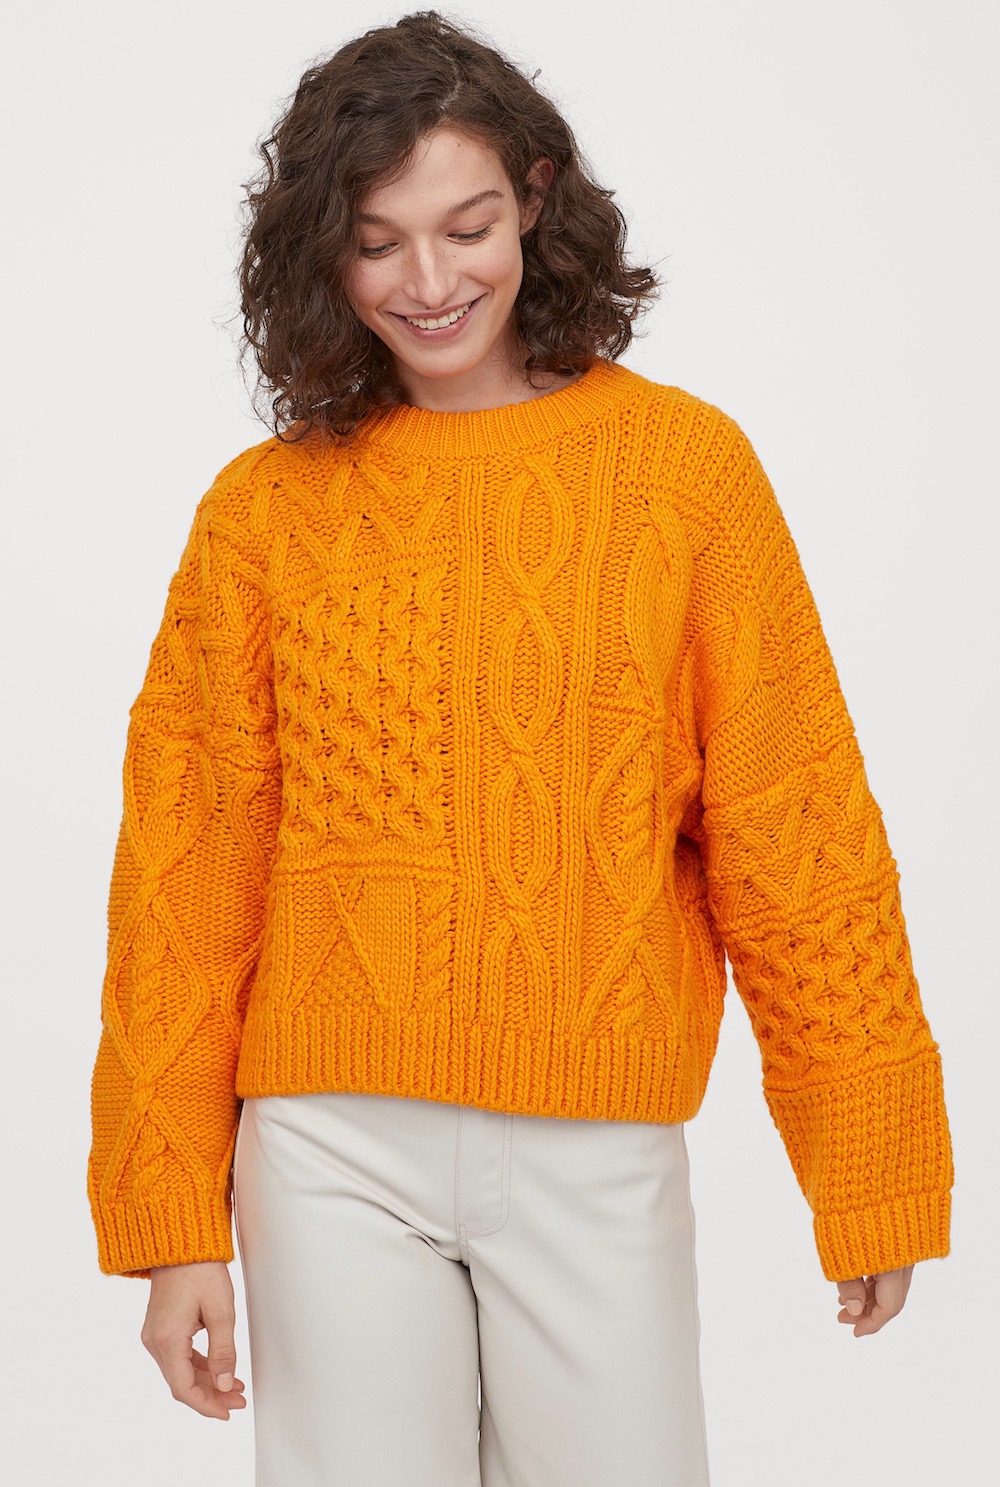 12 Tangerine Pieces to Help You Stand Out This Fall - theFashionSpot